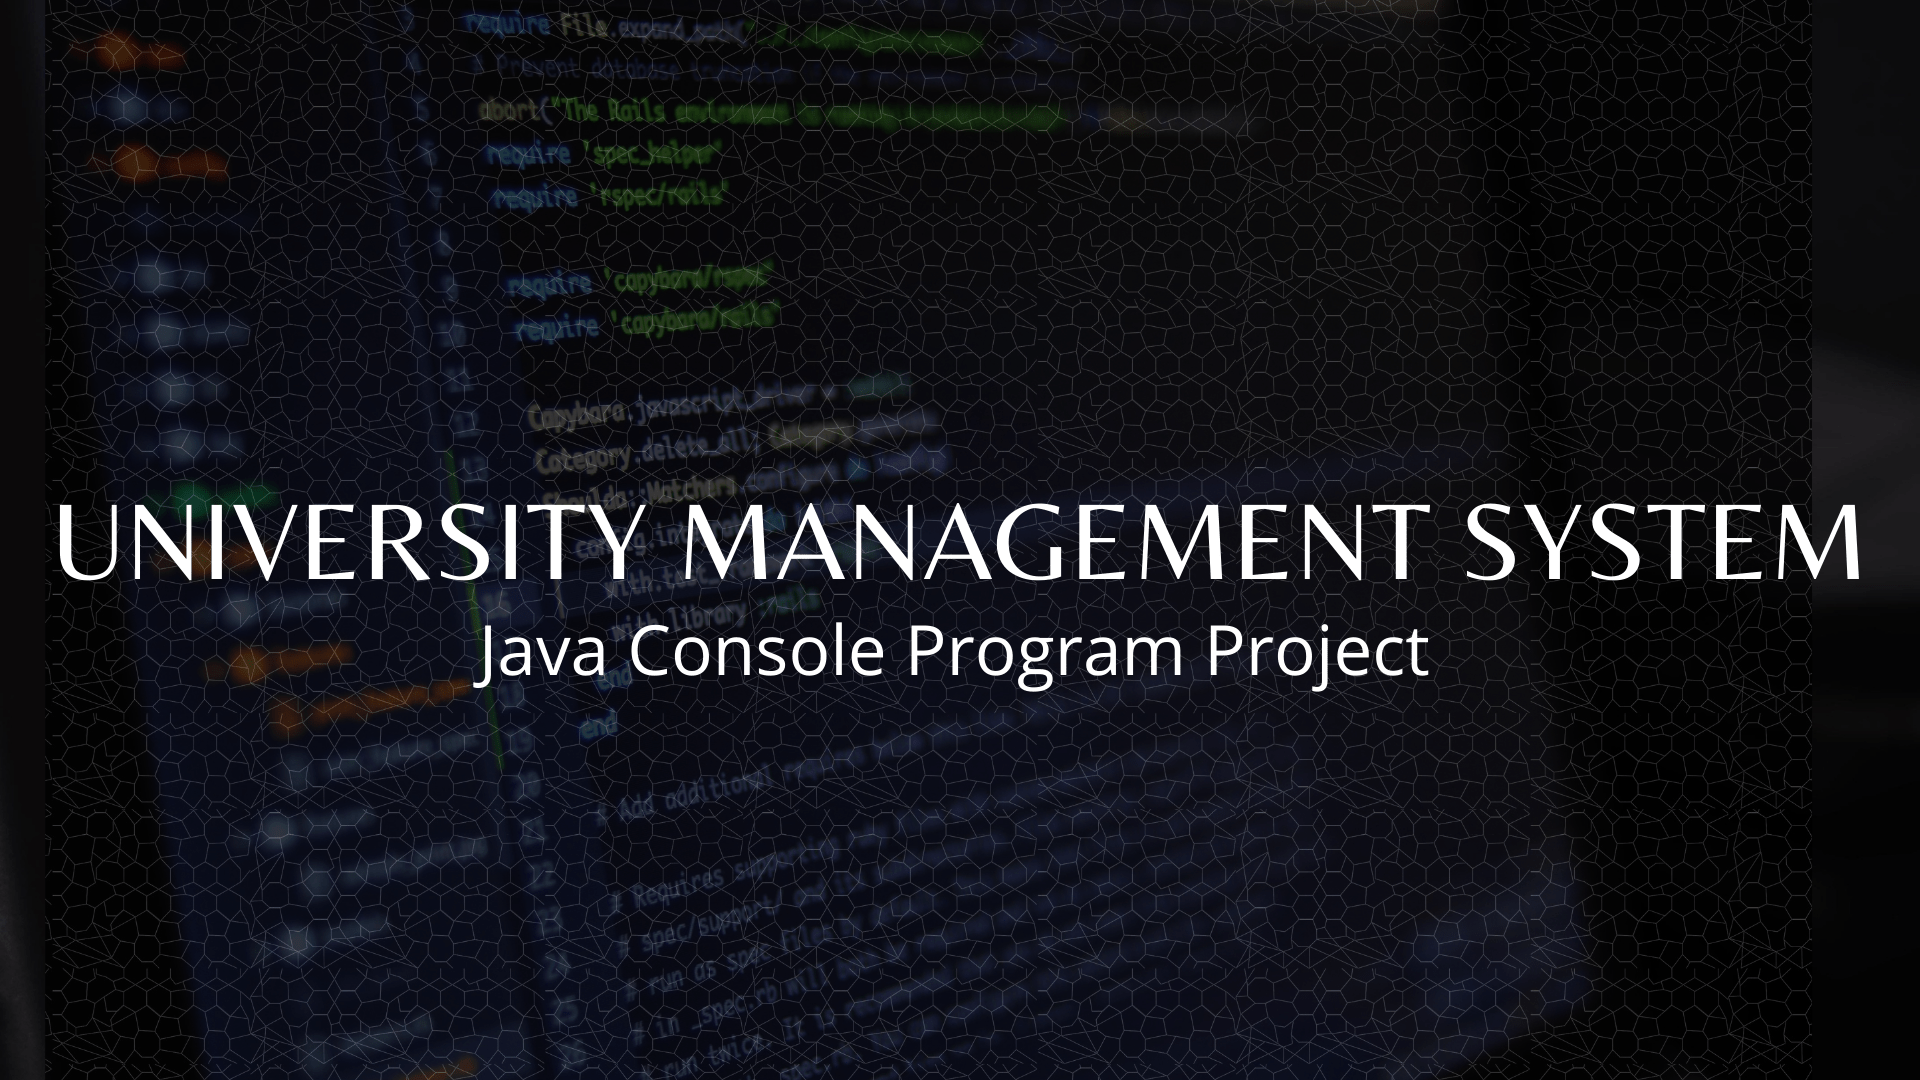 A Simple "University Management System" (UMS) Console Program in Java with Project Files